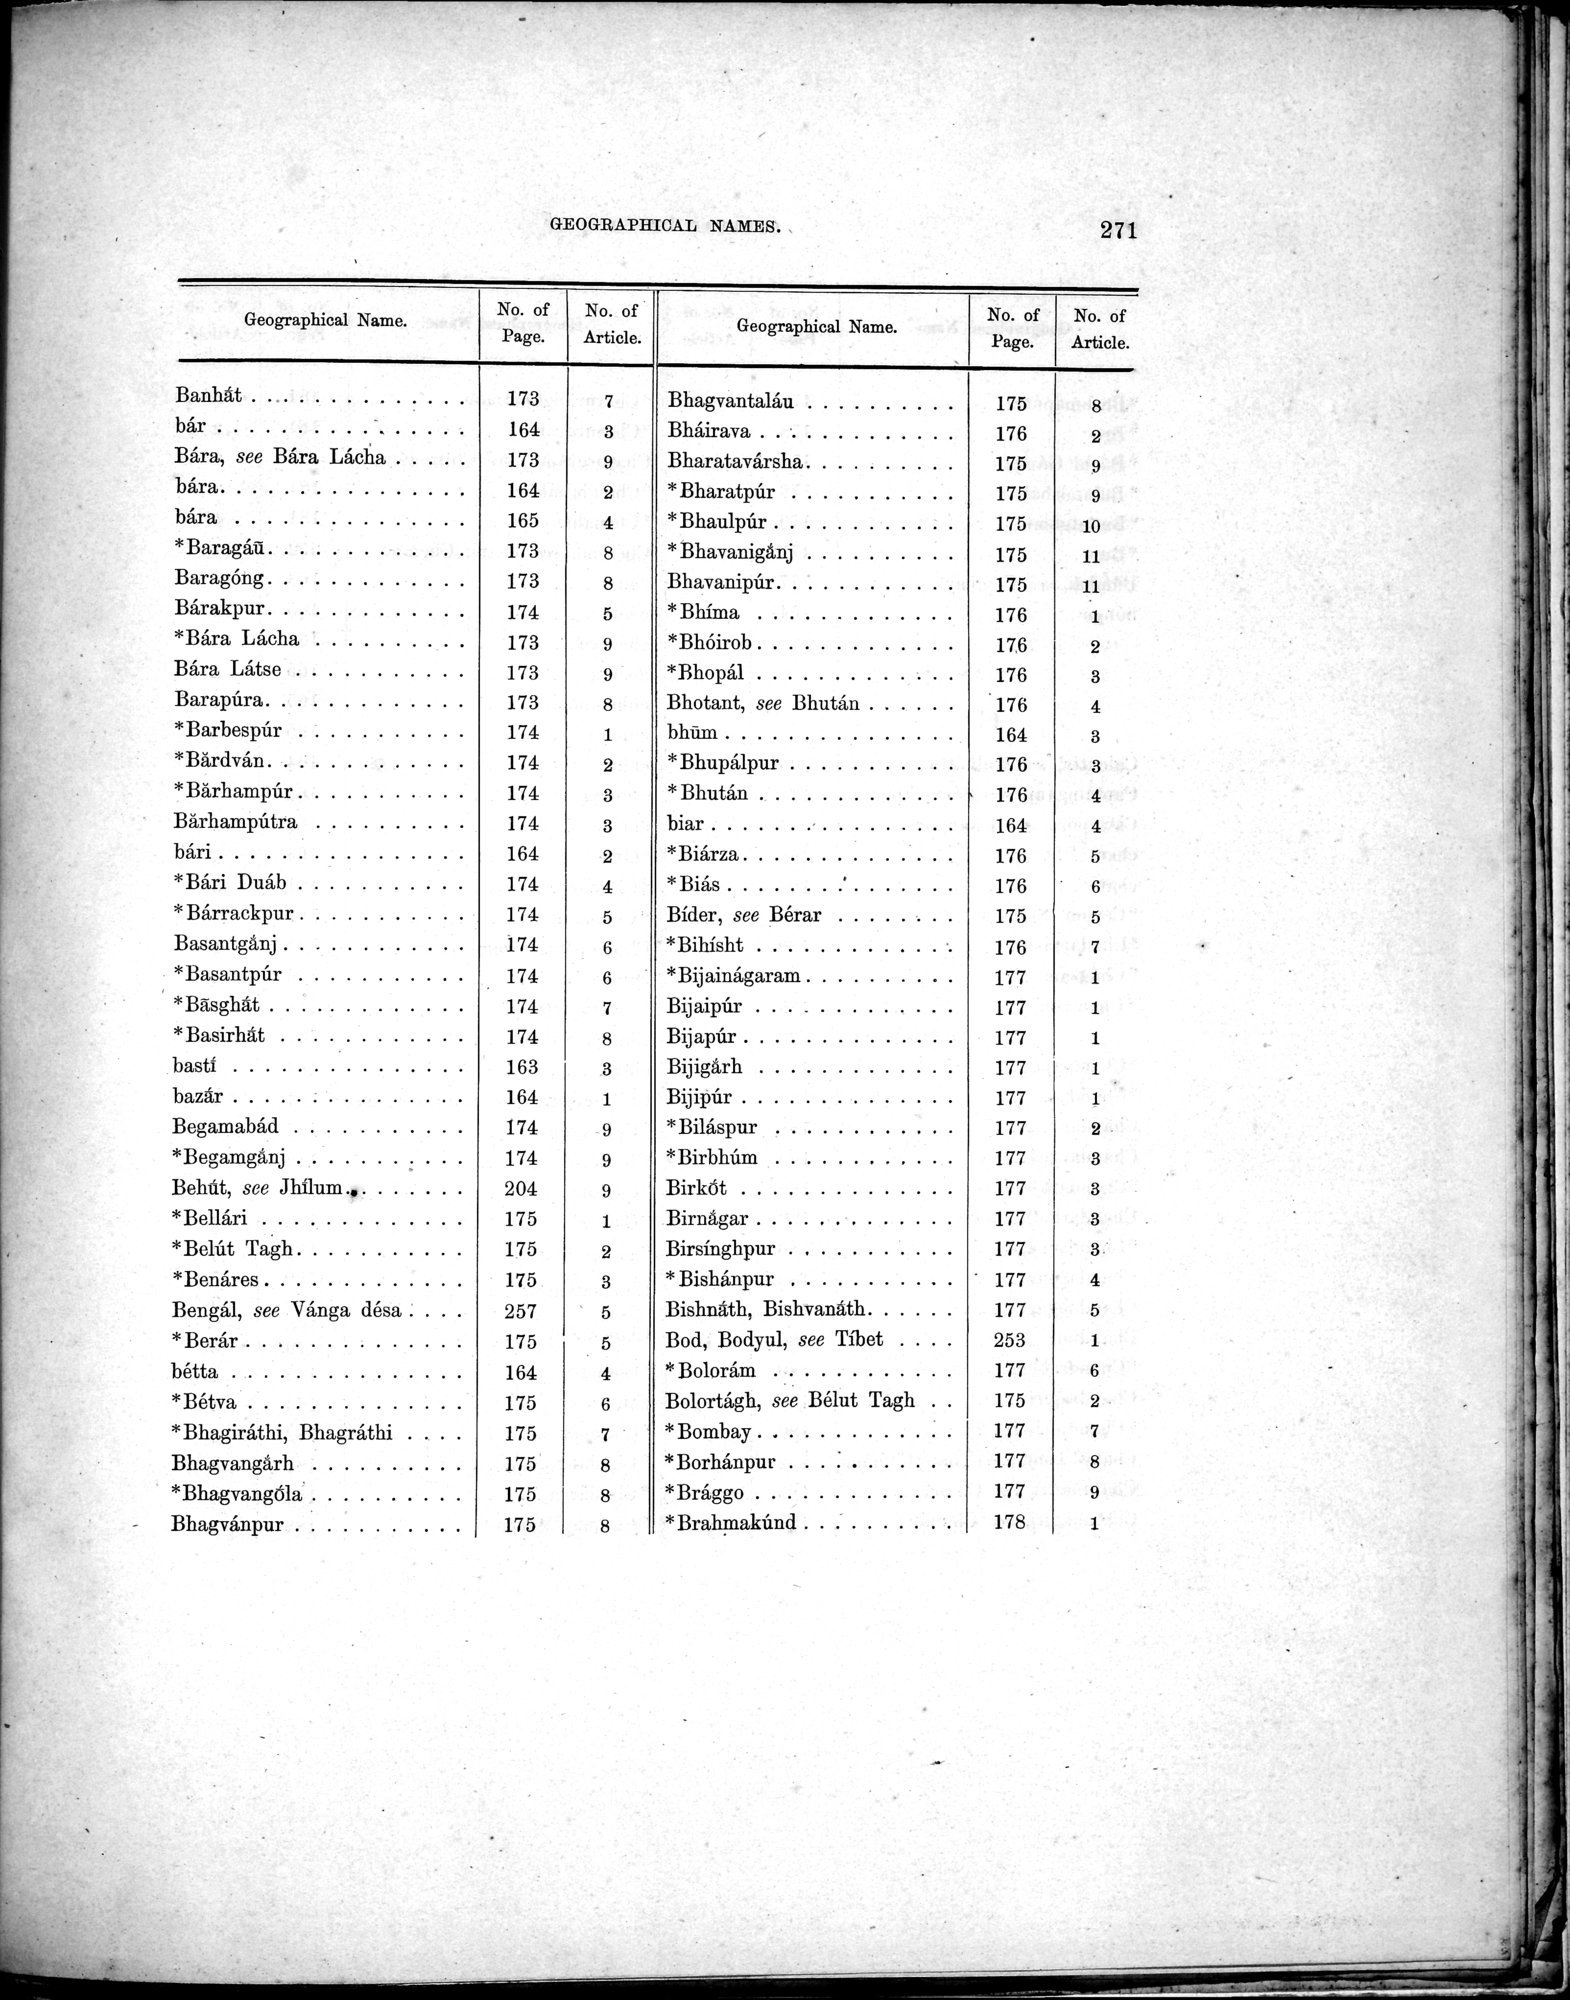 Results of a Scientific Mission to India and High Asia : vol.3 / Page 303 (Grayscale High Resolution Image)